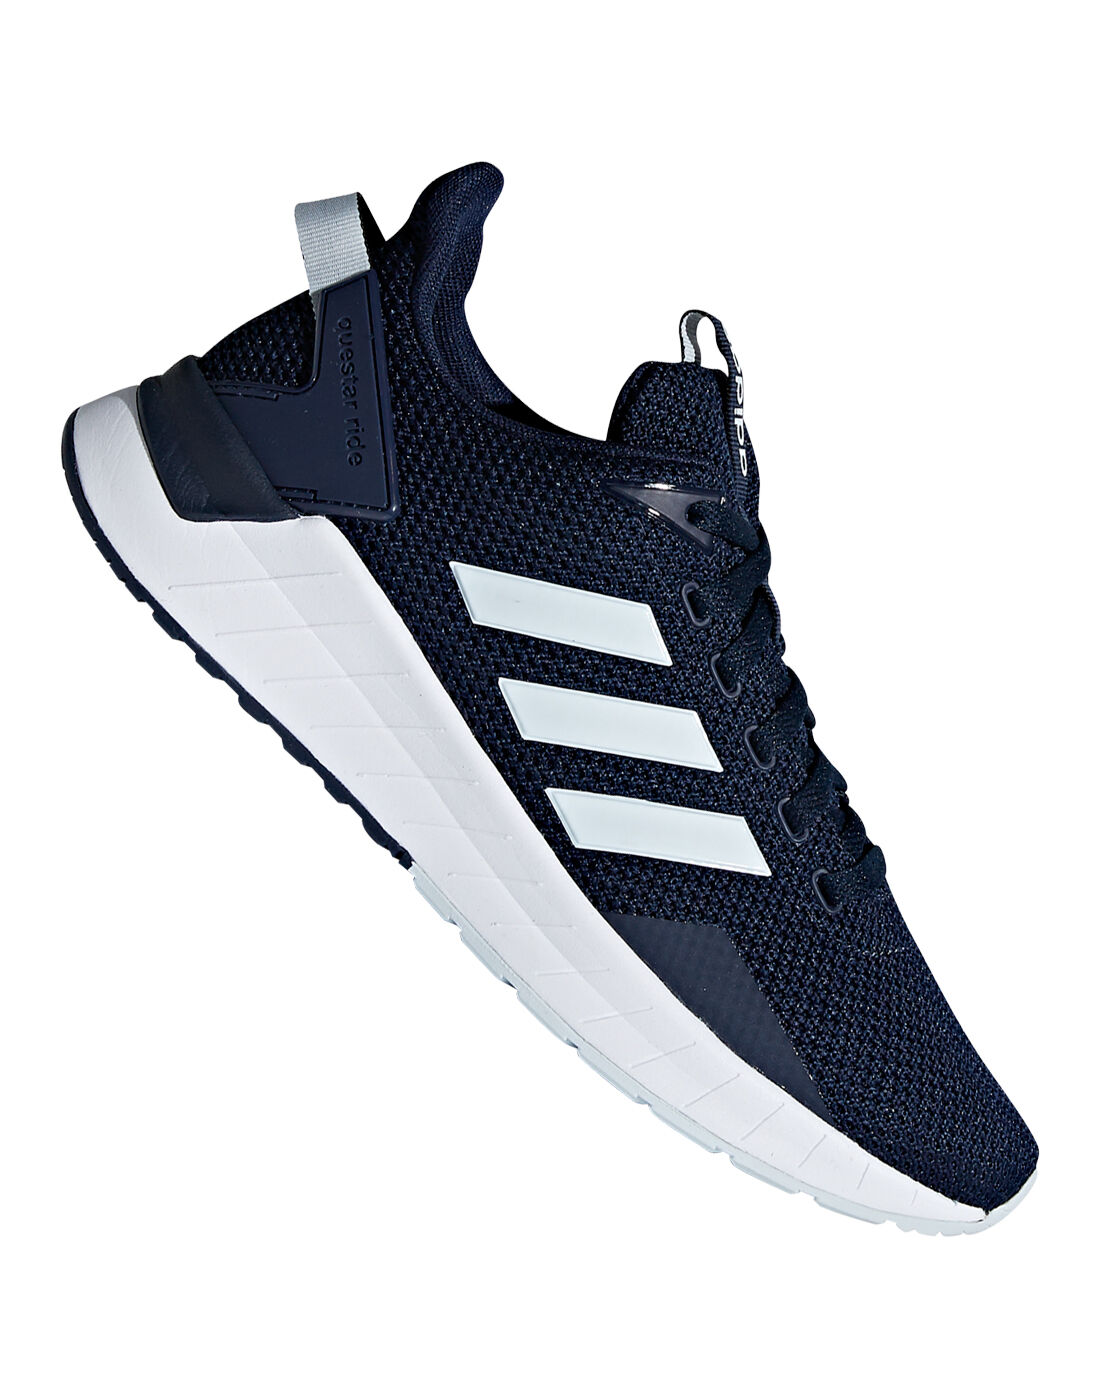 adidas Womens Questar Ride - Navy | Life Style Sports IE